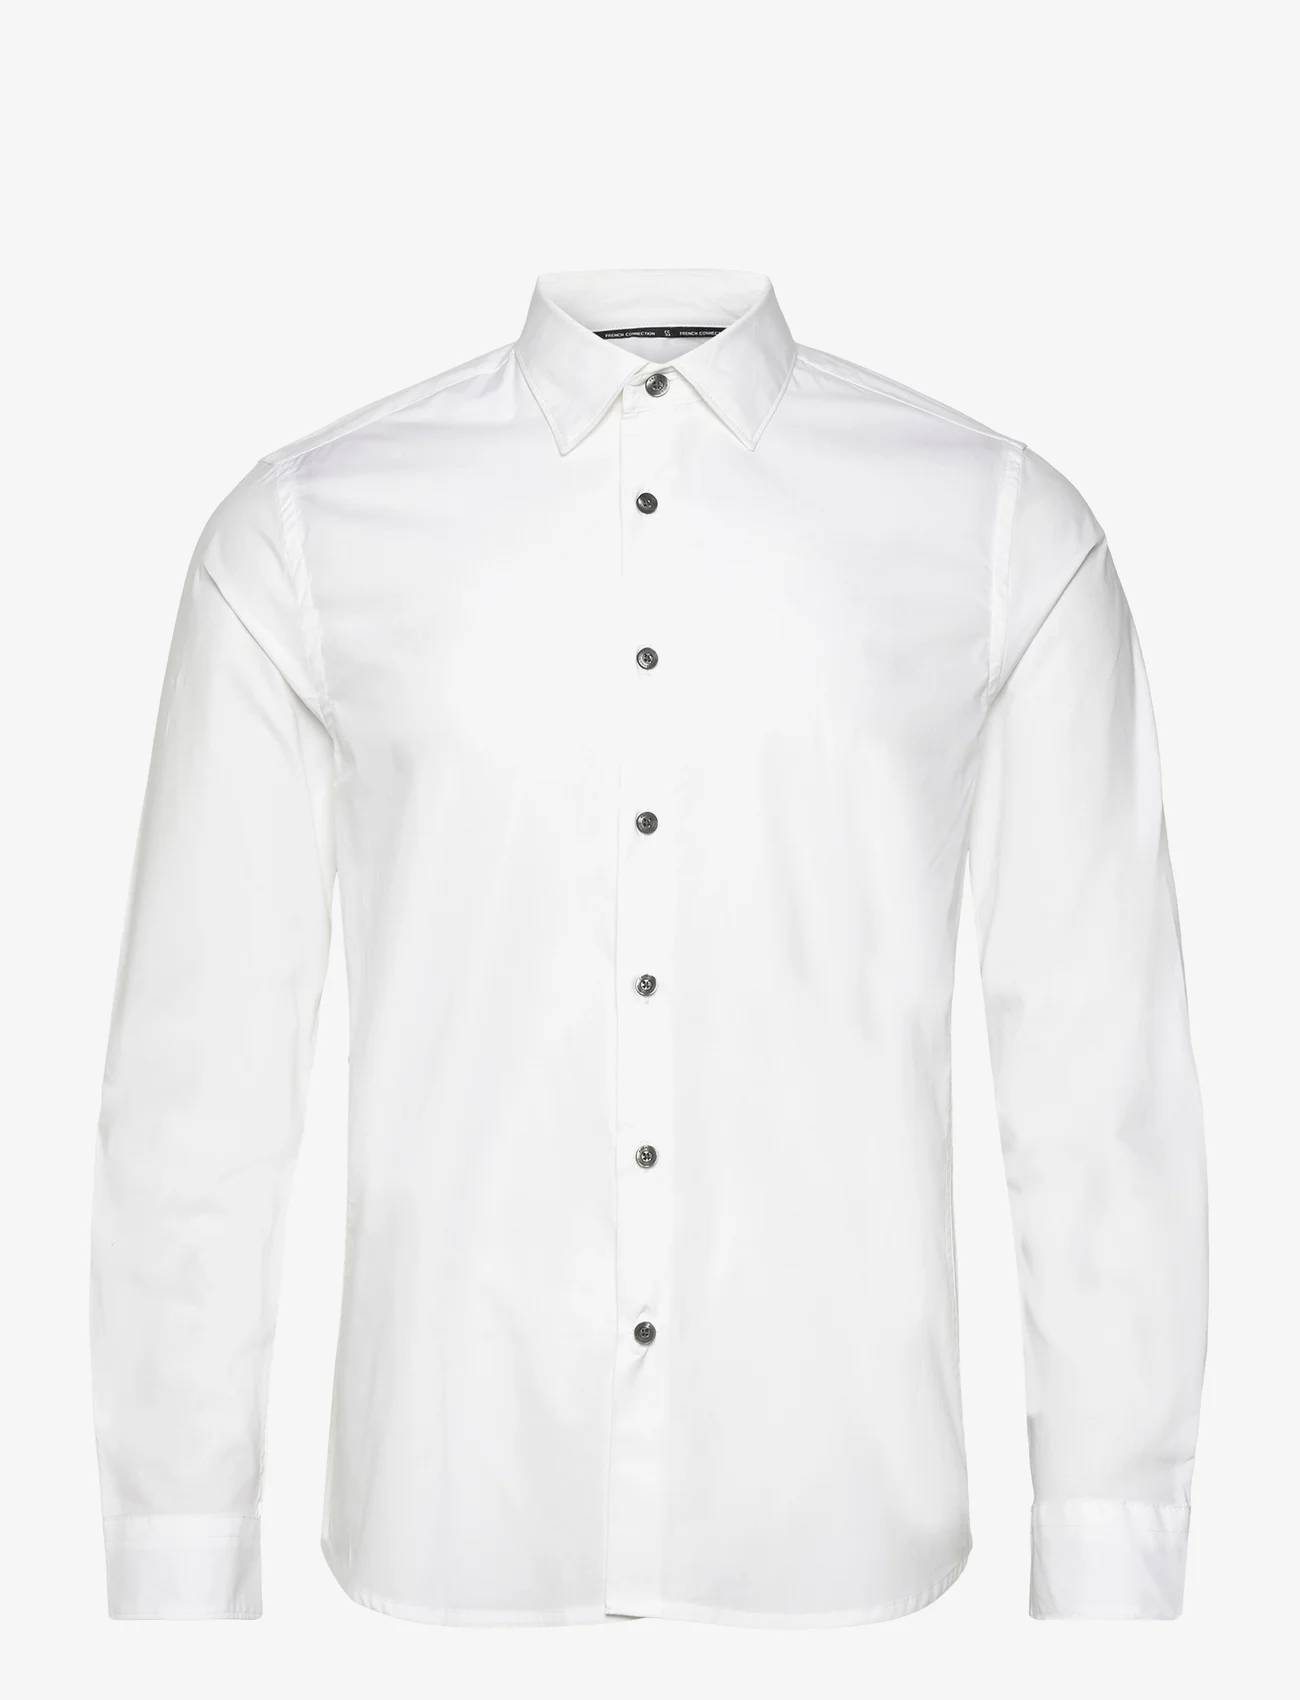 French Connection - LS STRETCH POPLIN SHIRT - chemises d'affaires - white - 1